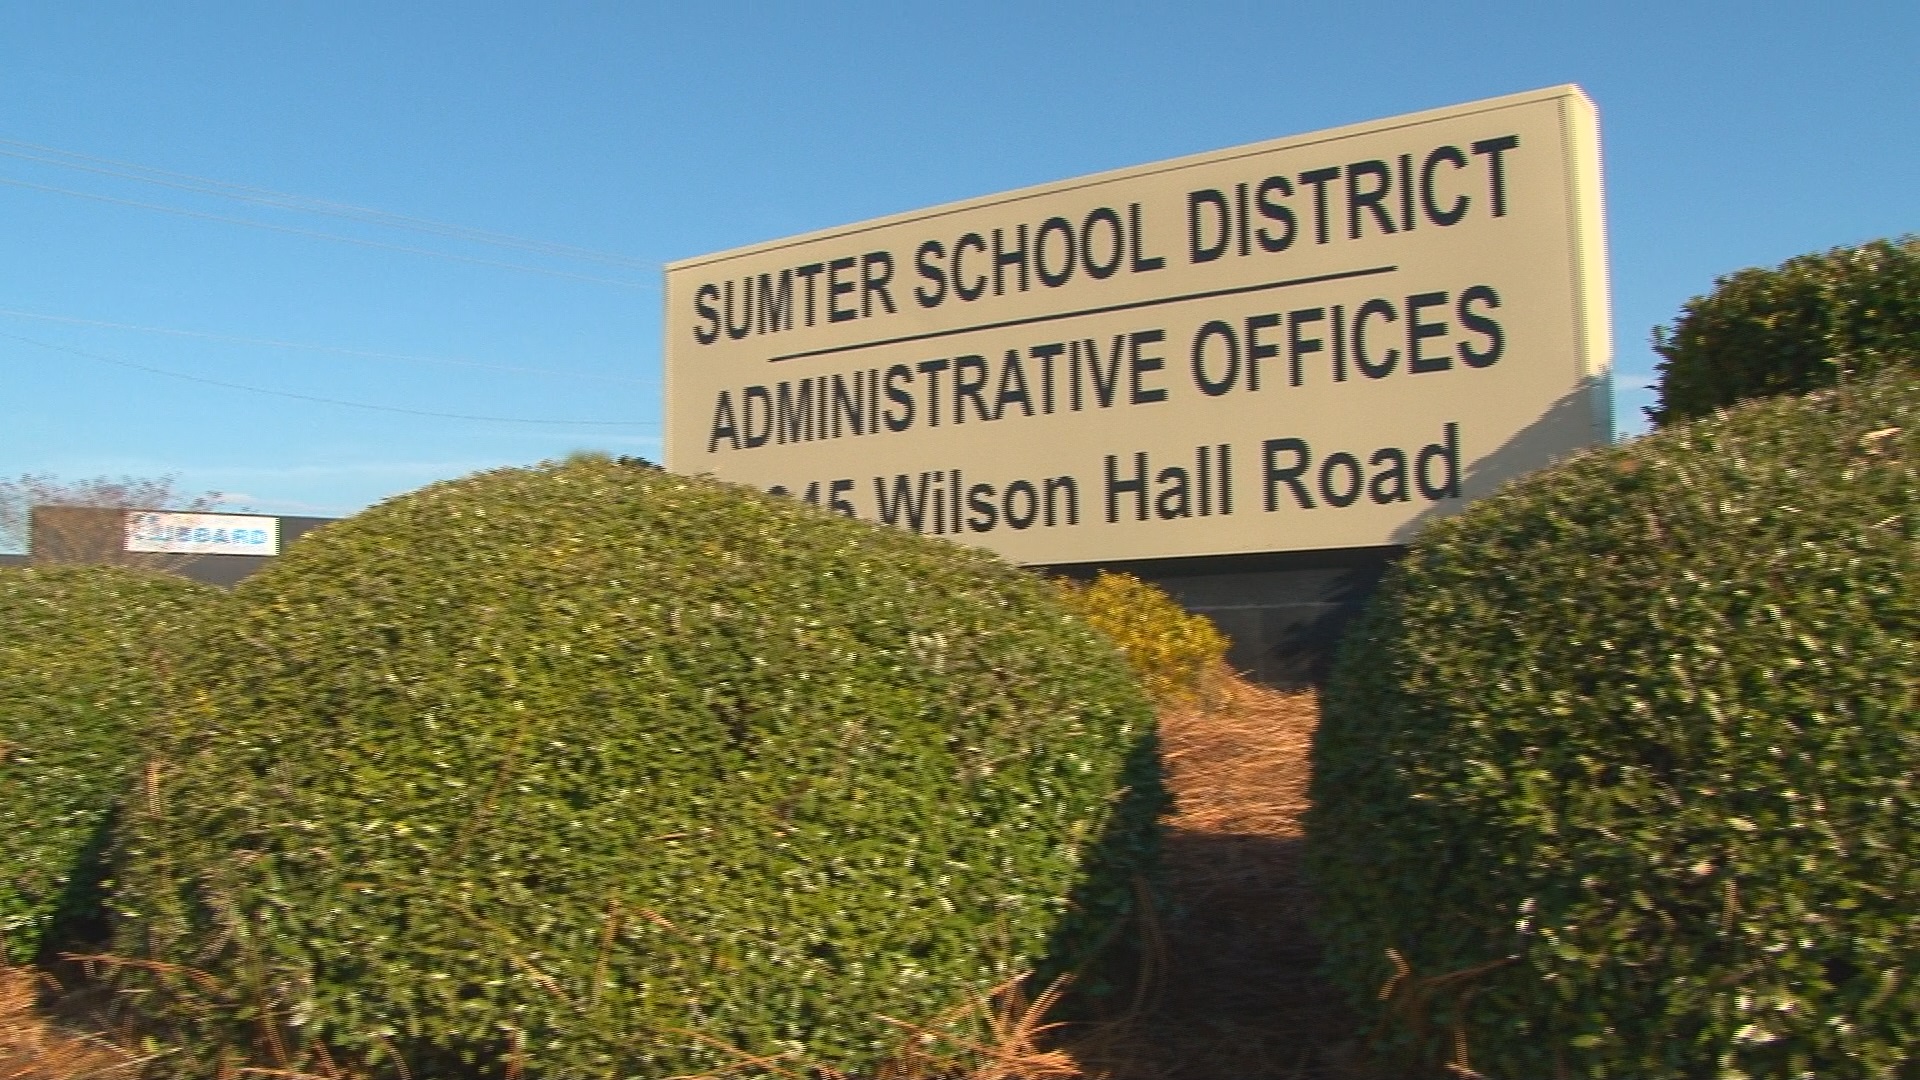 wltx.com | Sumter School Financial Consultant Speaks About Fixing